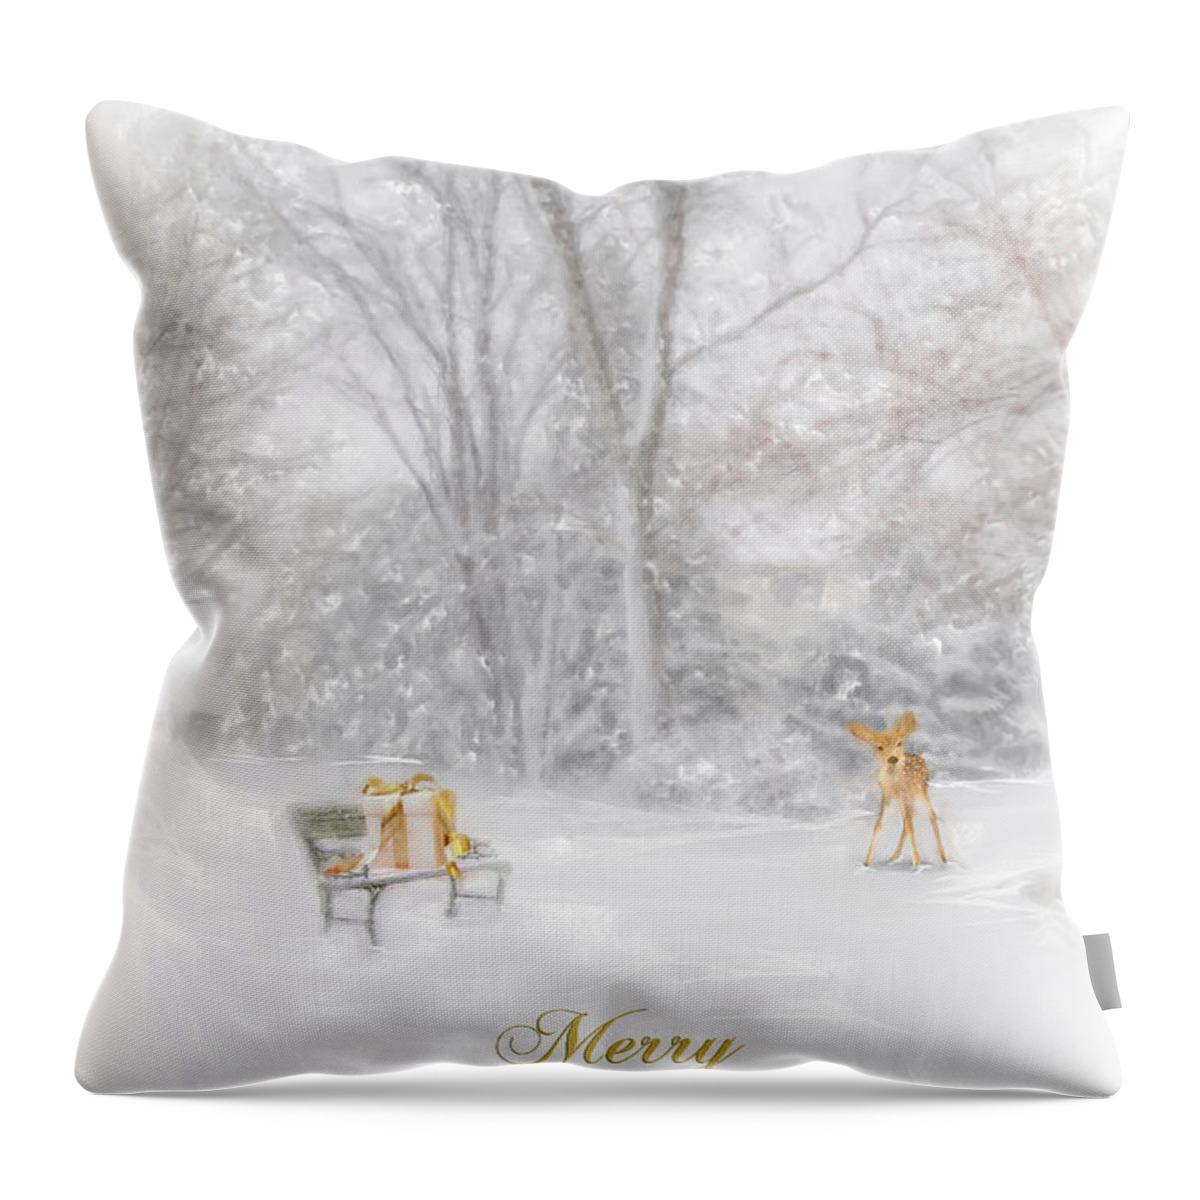 Merry Christmas Throw Pillow featuring the photograph Merry Christmas #2 by Mary Timman